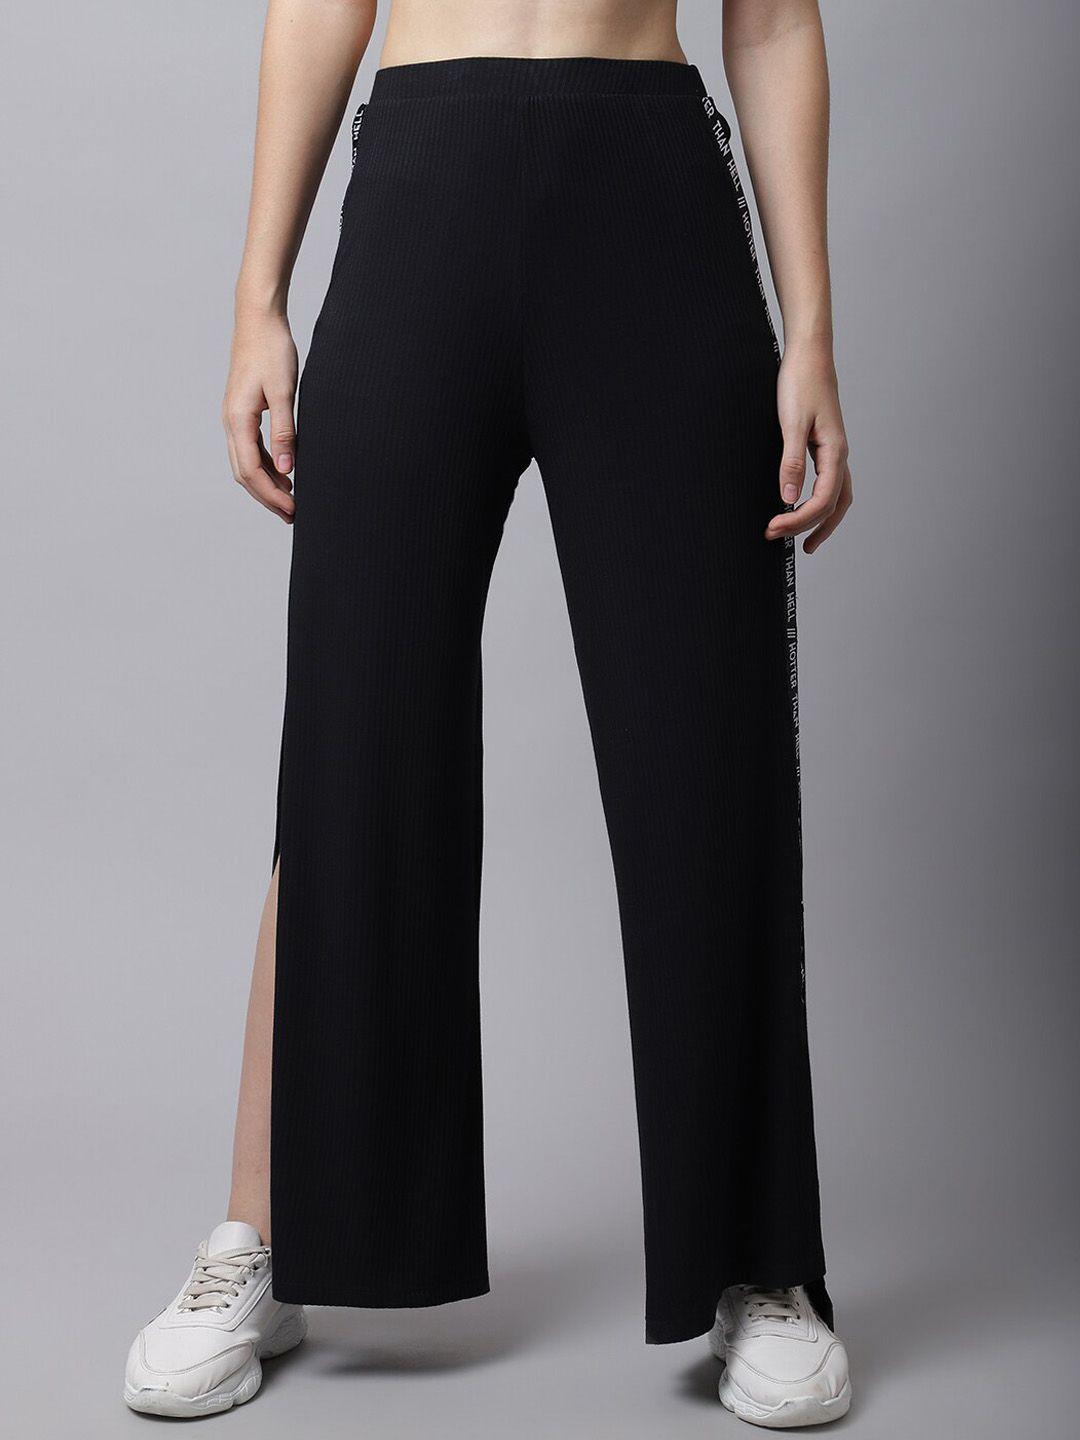 door74 women ribbed with side print detail rapid-dry track pants